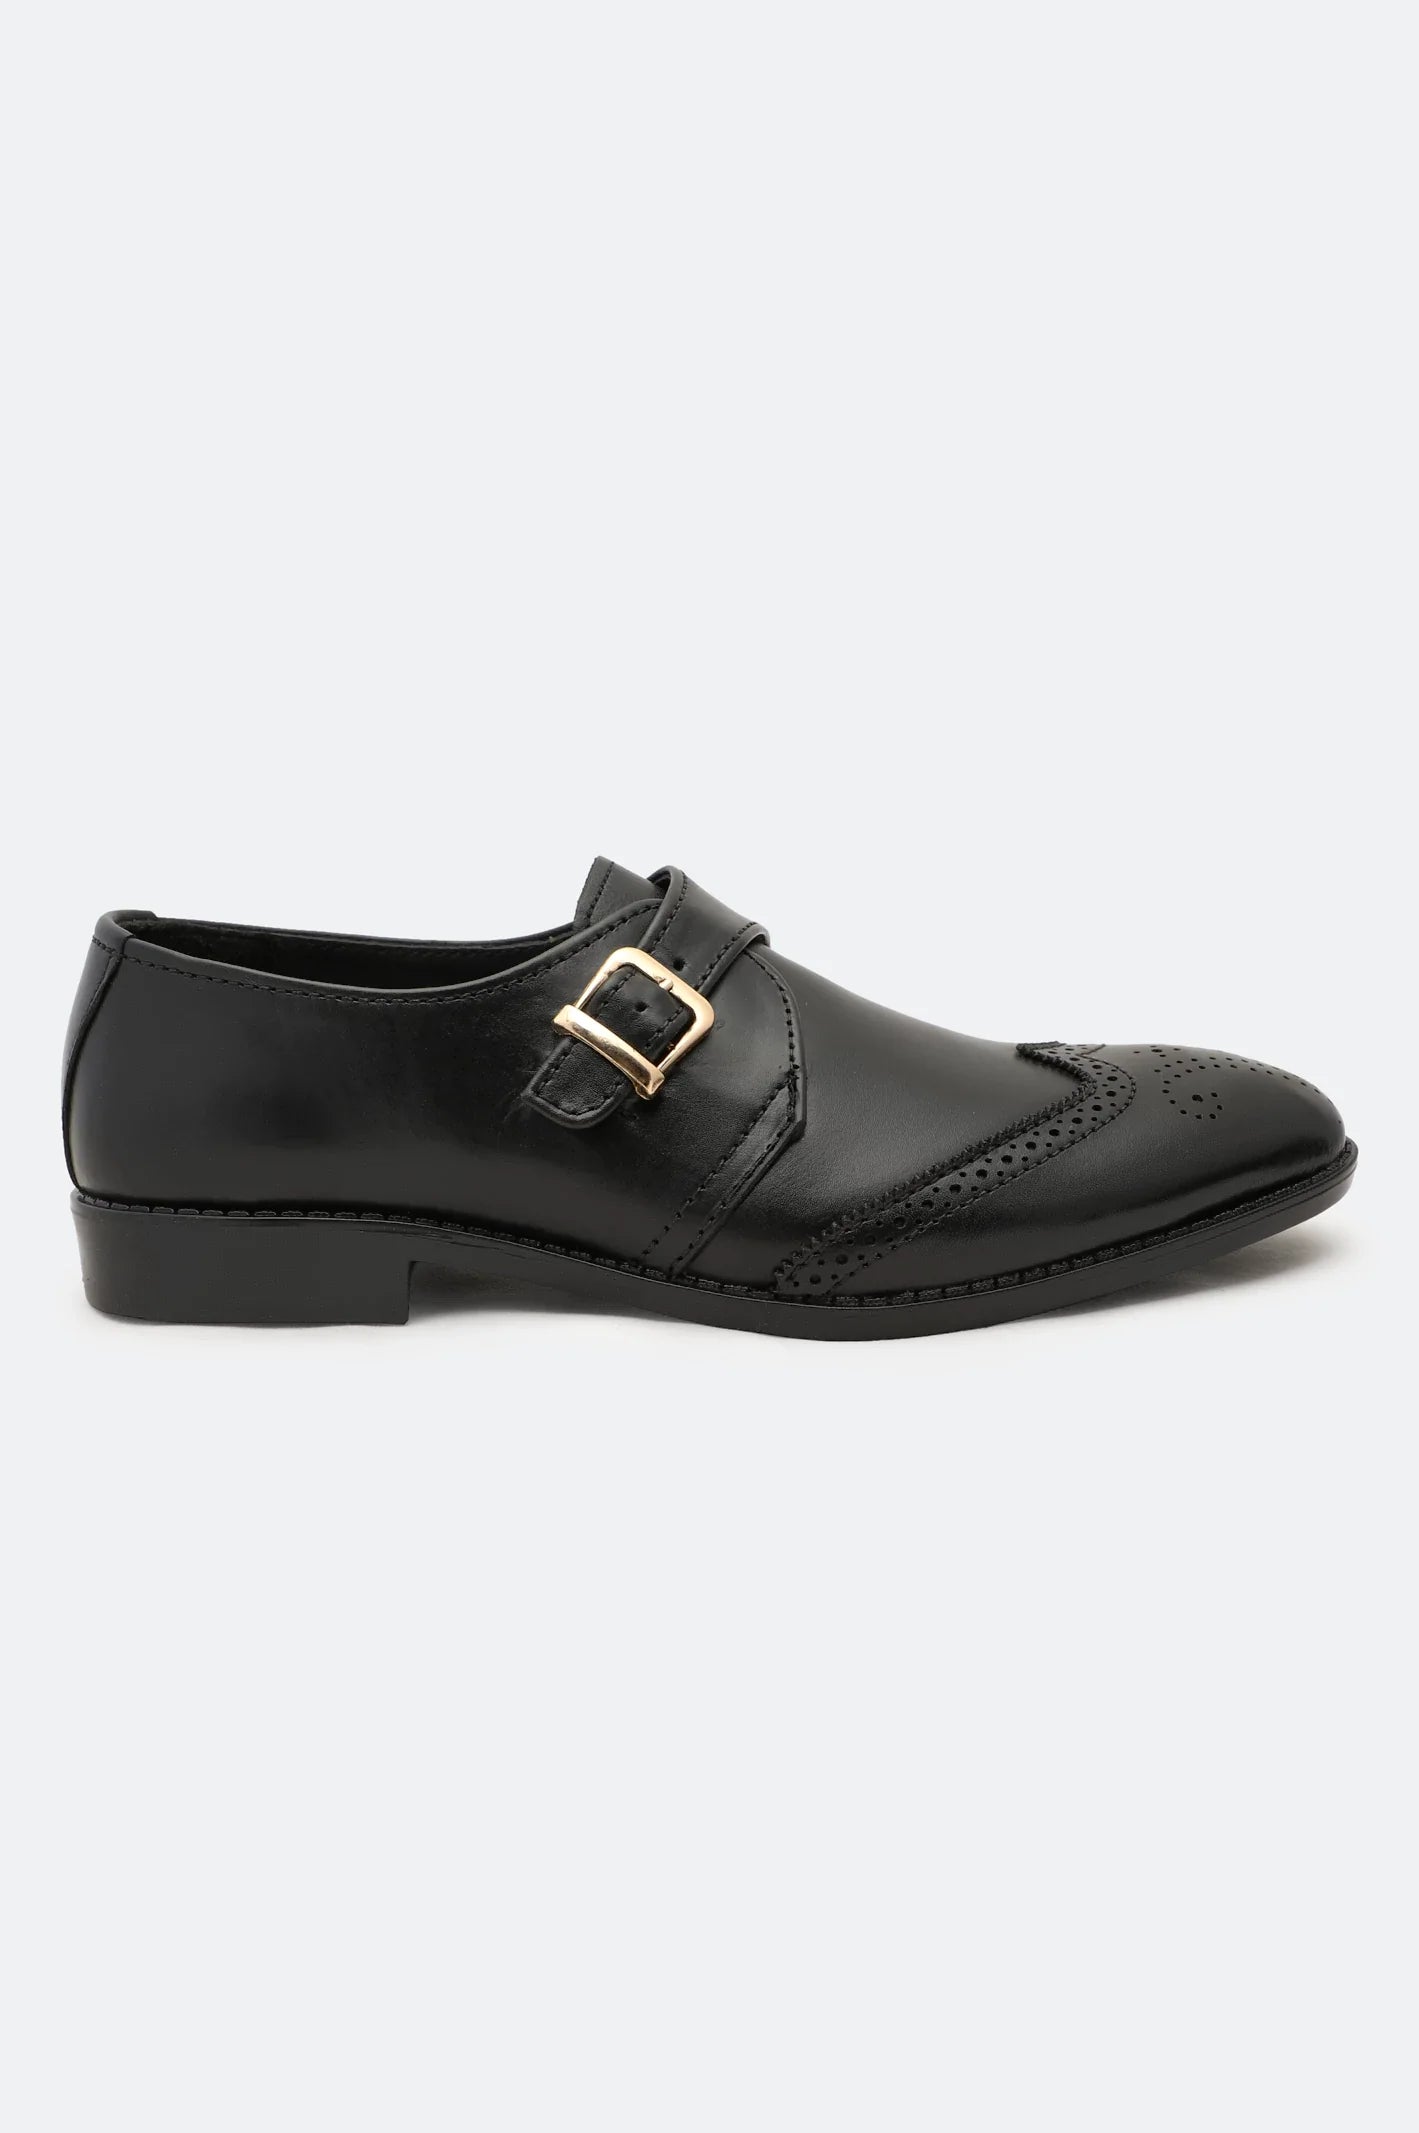 Black Monk Formal Shoes From French Emporio By Diners